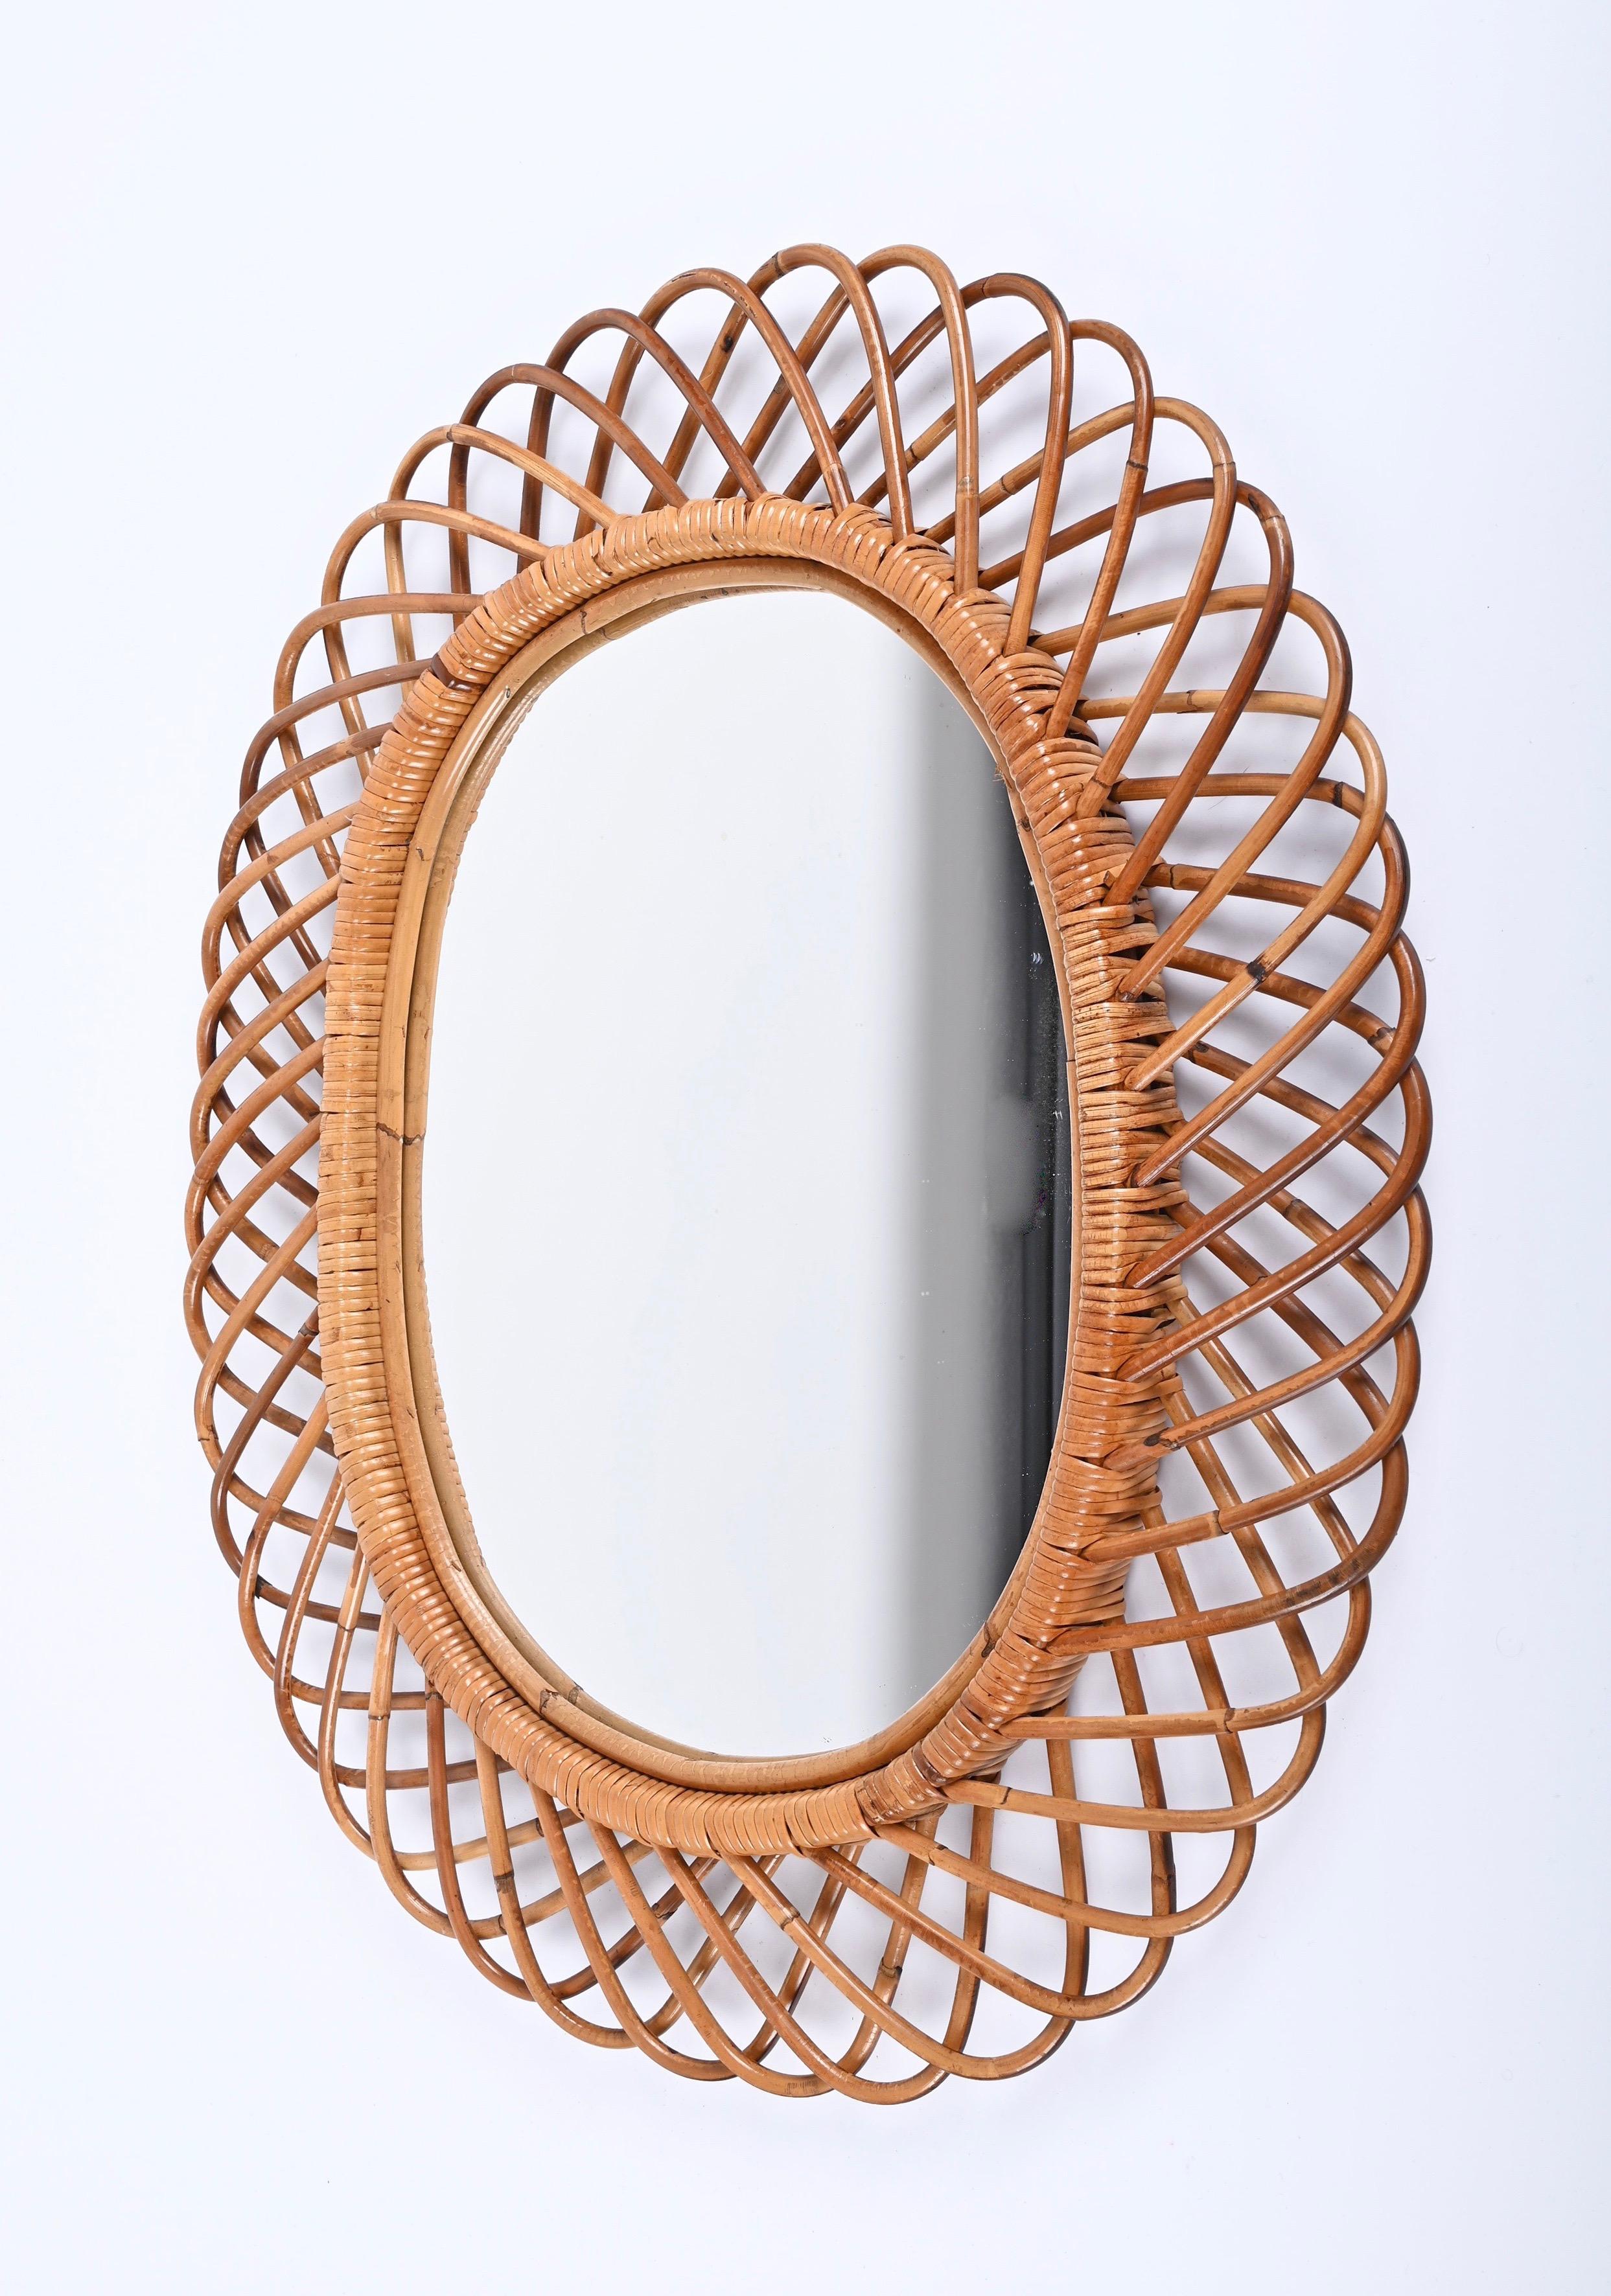 Mid-20th Century Midcentury French Riviera Bamboo and Rattan Oval Mirror Franco Albini Italy 1960